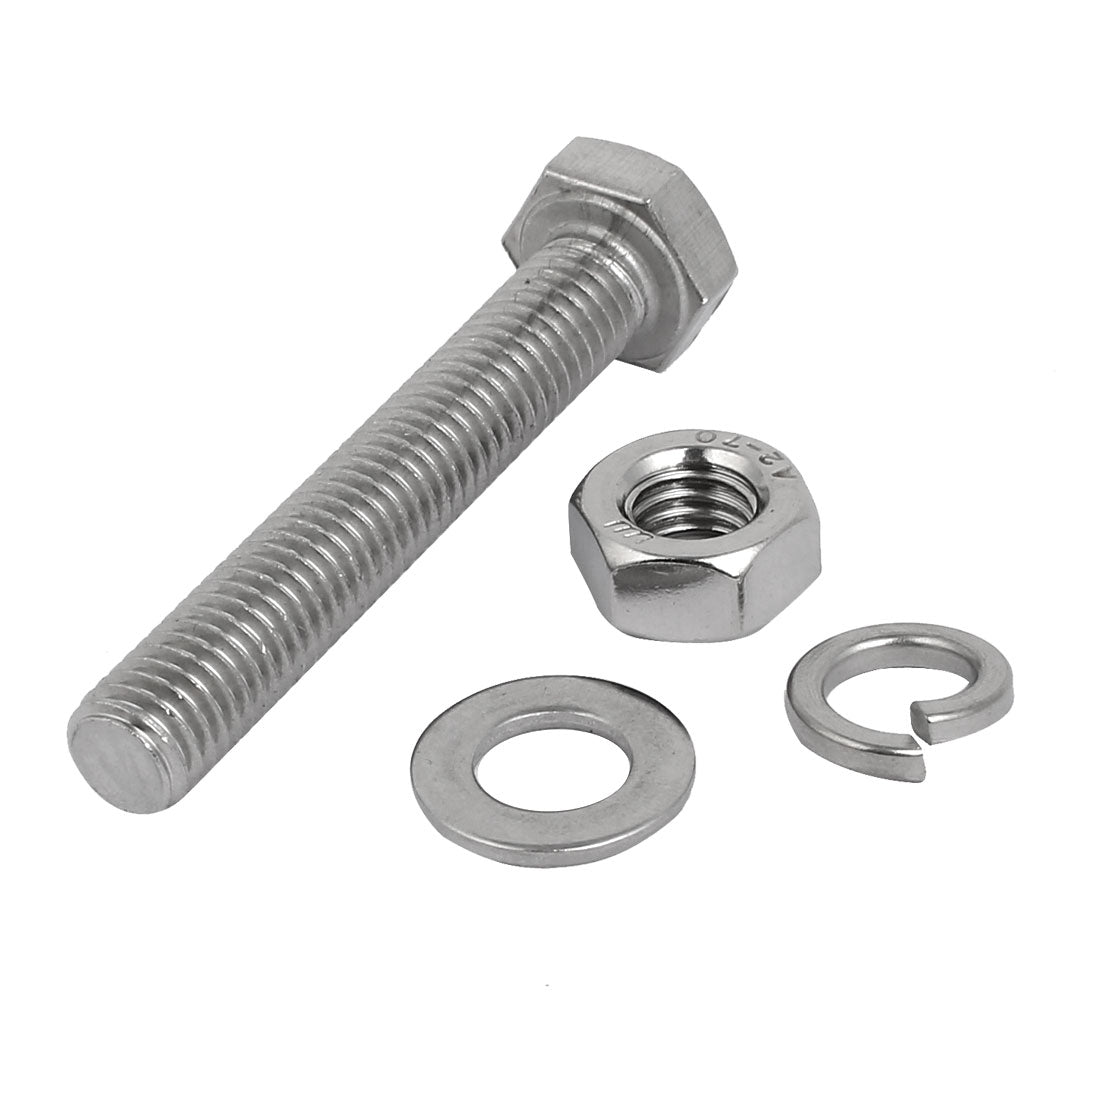 uxcell Uxcell 5 Set M8x50mm 304 Stainless Steel Hex Bolts w Nuts and Washers Assortment Kit